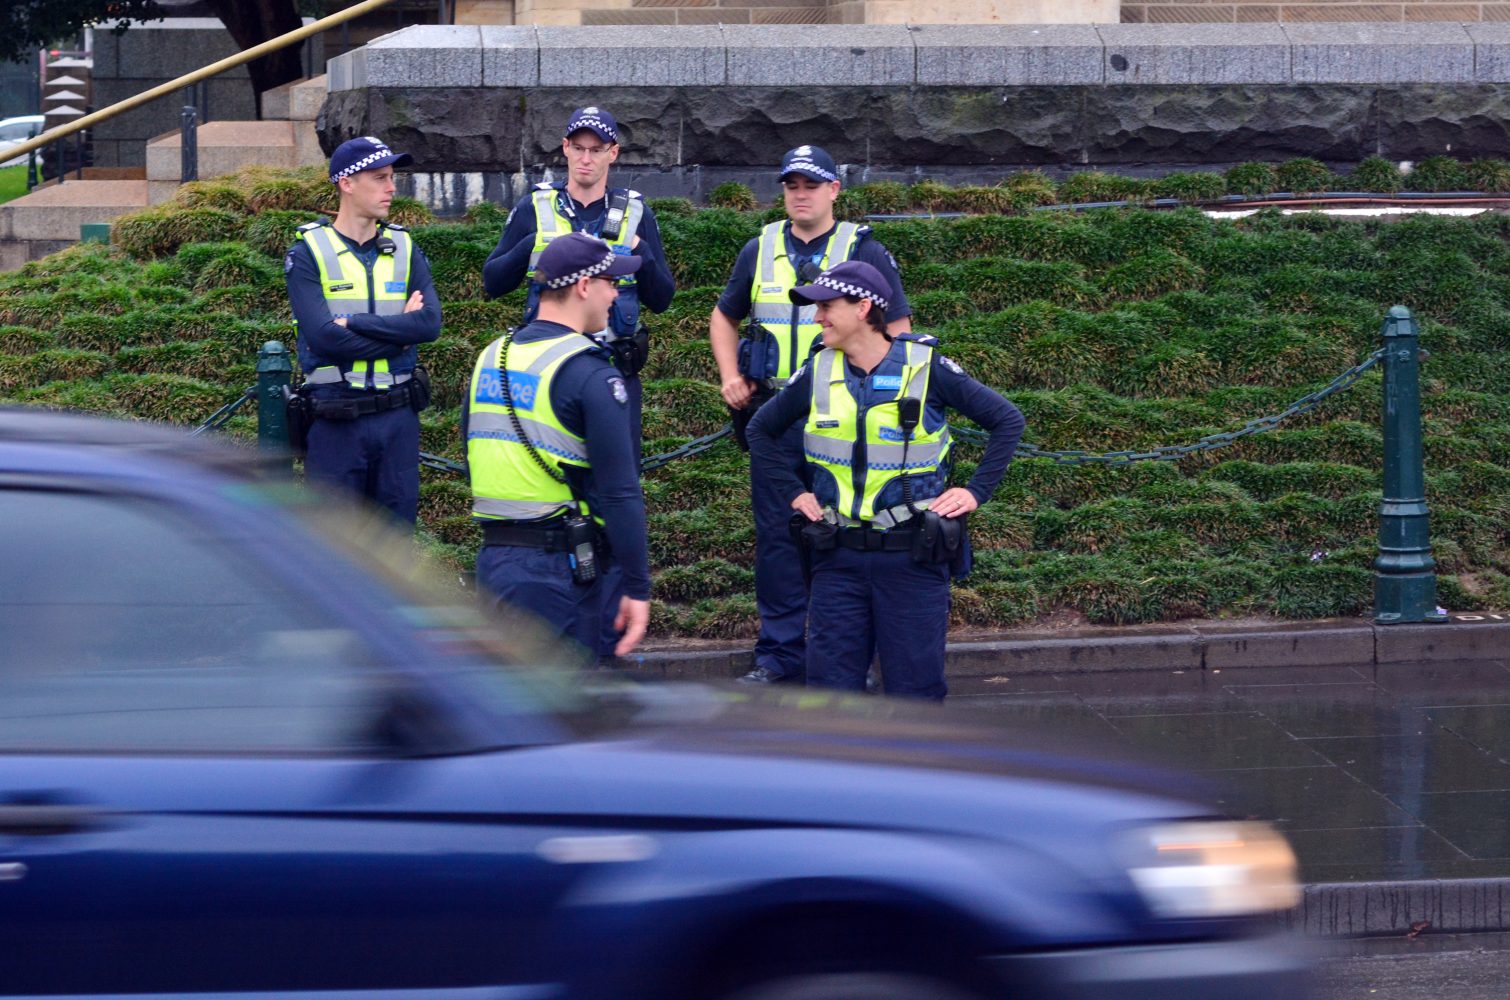 Melbourne, Australia - April 10, 2014: Victoria Policemen patrol Melbourne streets. As of 2013, Victoria Police has over 12,539 sworn members across 325 police stations. It has a running cost of aprox. 2. 1b $AUD (A$372 per resident).